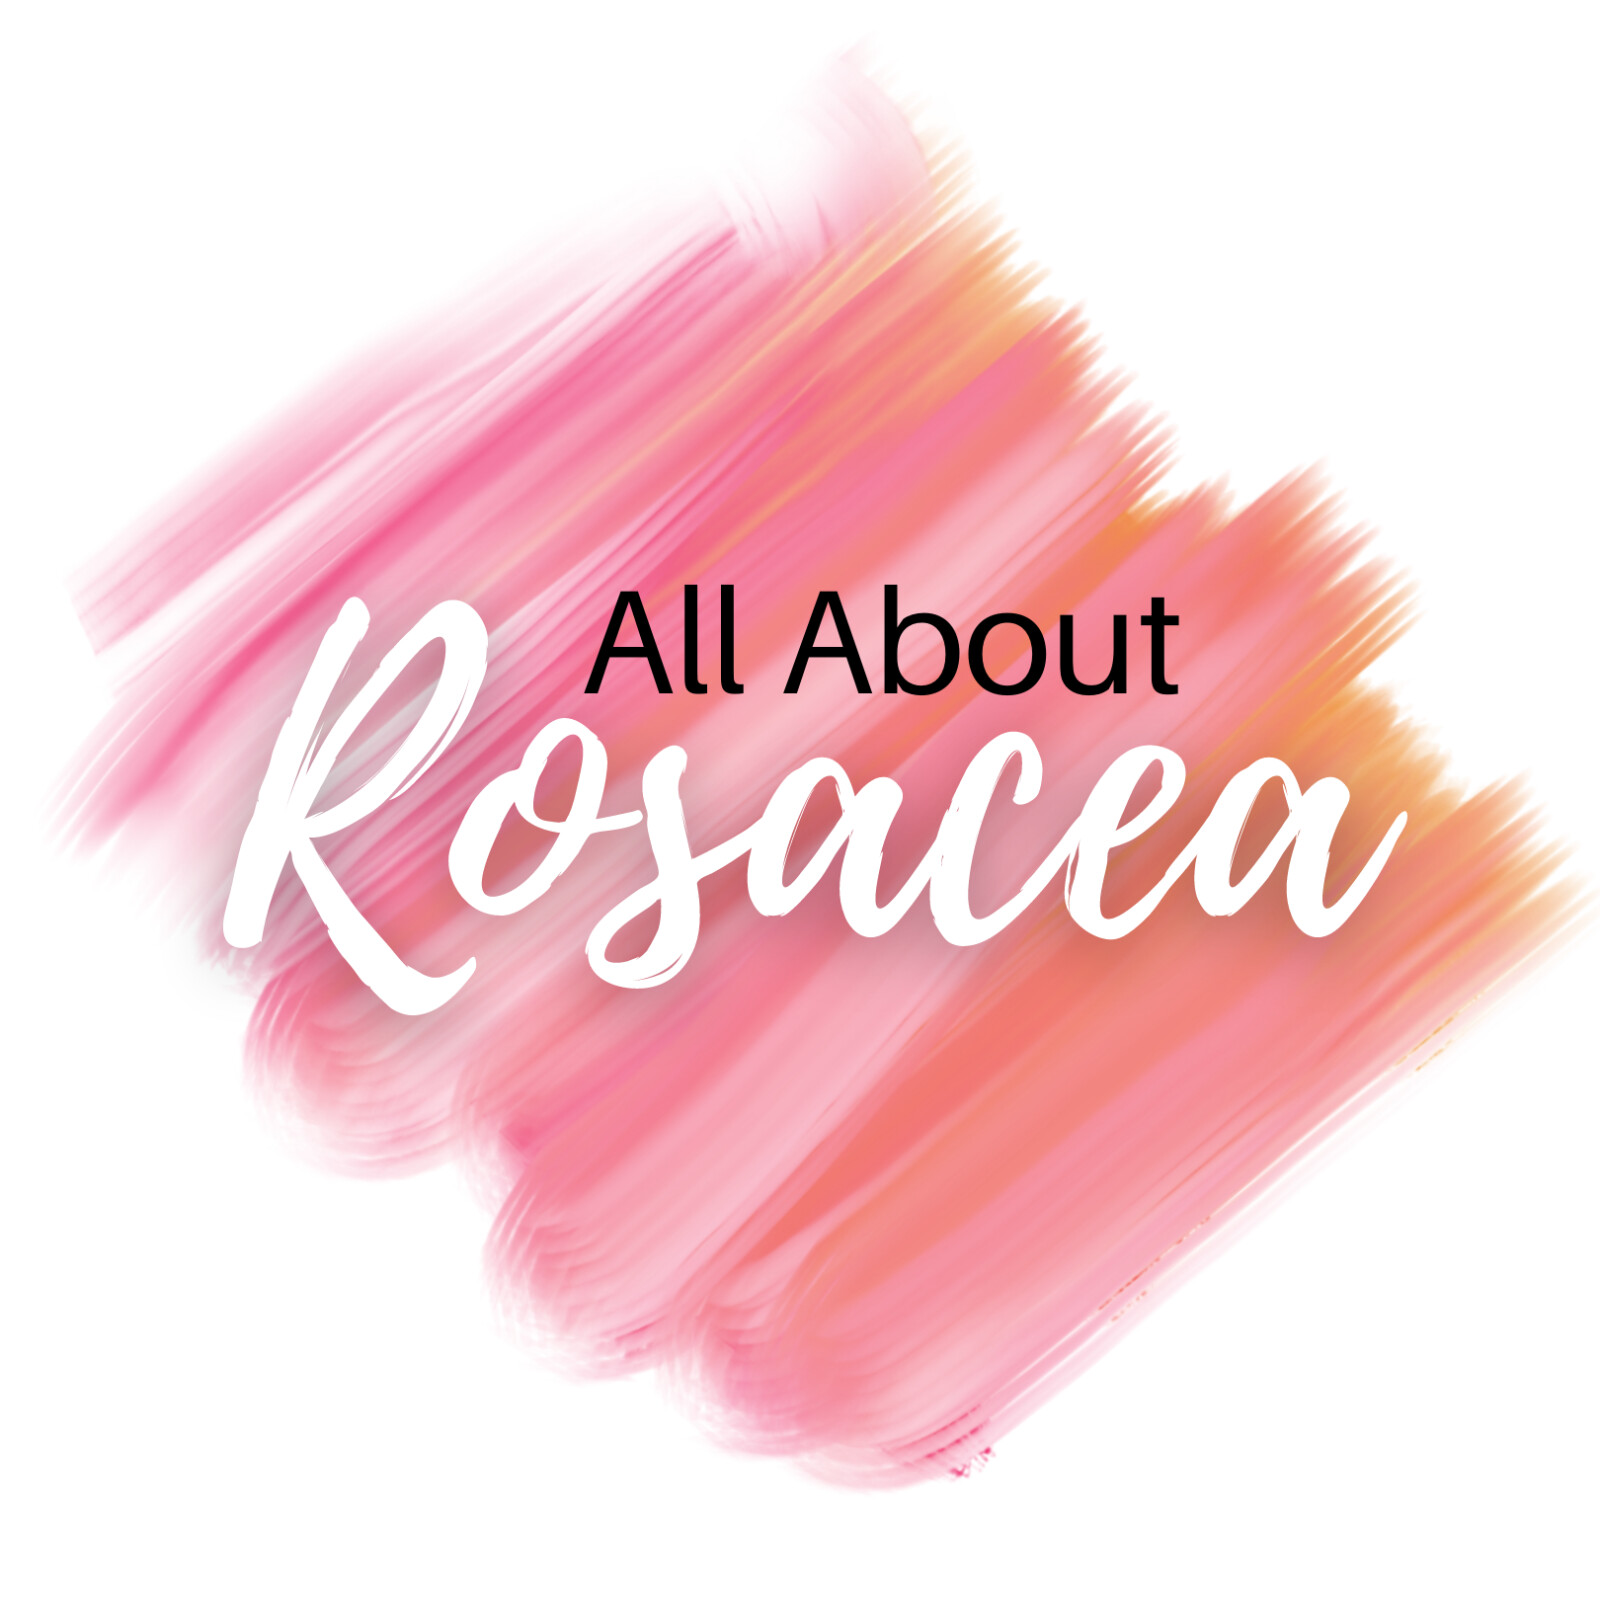 All About Rosacea